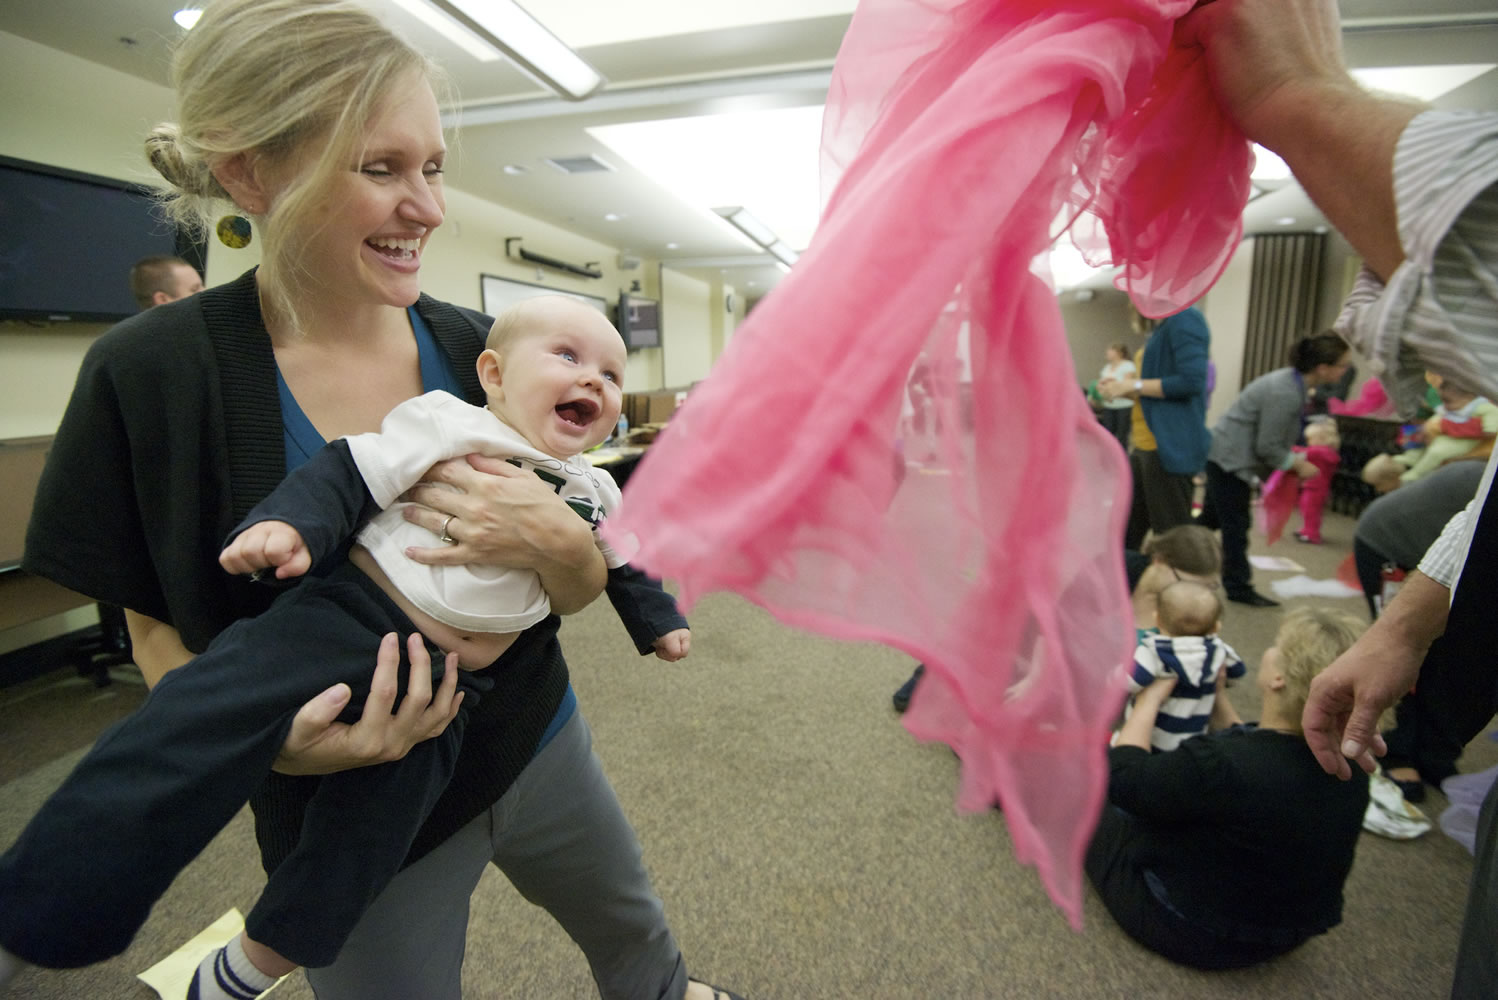 Heather Stuart, left, and her 7-month-old son, Obadiah, laugh as dad Steve Stuart, a Clark County commissioner, playfully waves a pink scarf during the &quot;Love, Talk, Play&quot; event Thursday at the Center for Community Health in Vancouver.